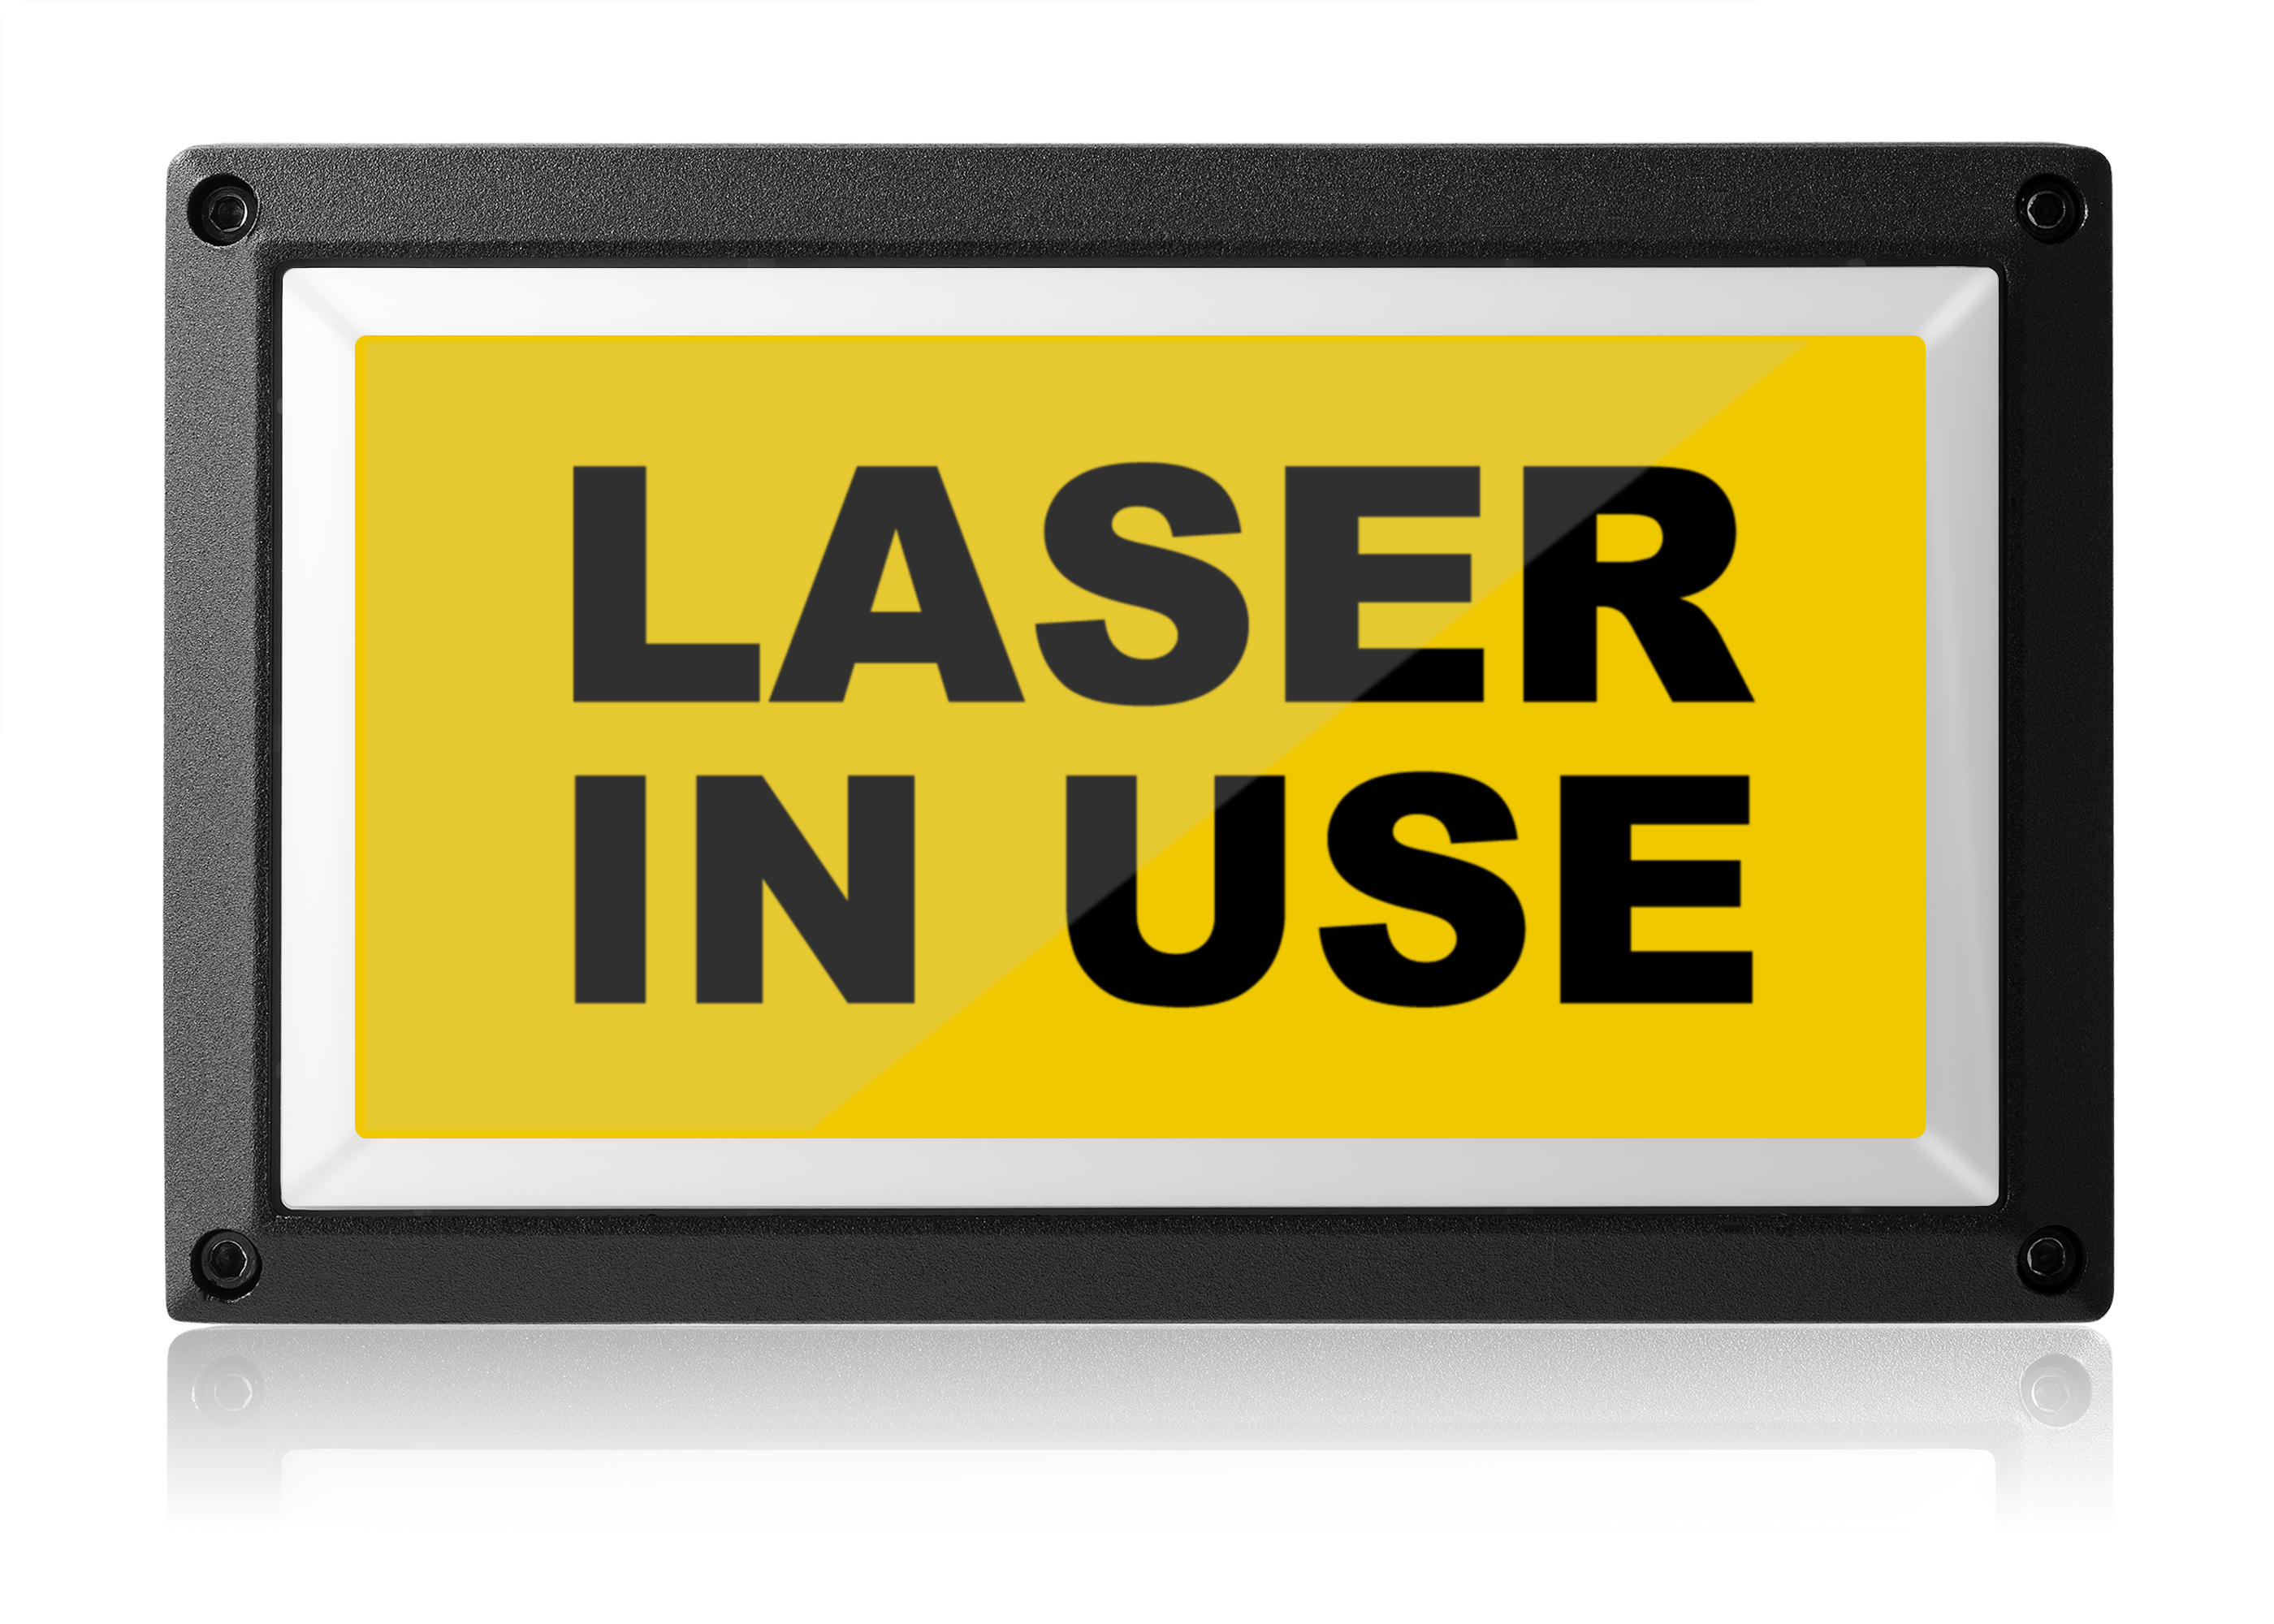 Laser In Use Light - Yellow - Rekall Dynamics LED Sign-Red-Low Voltage (12-24v DC)-